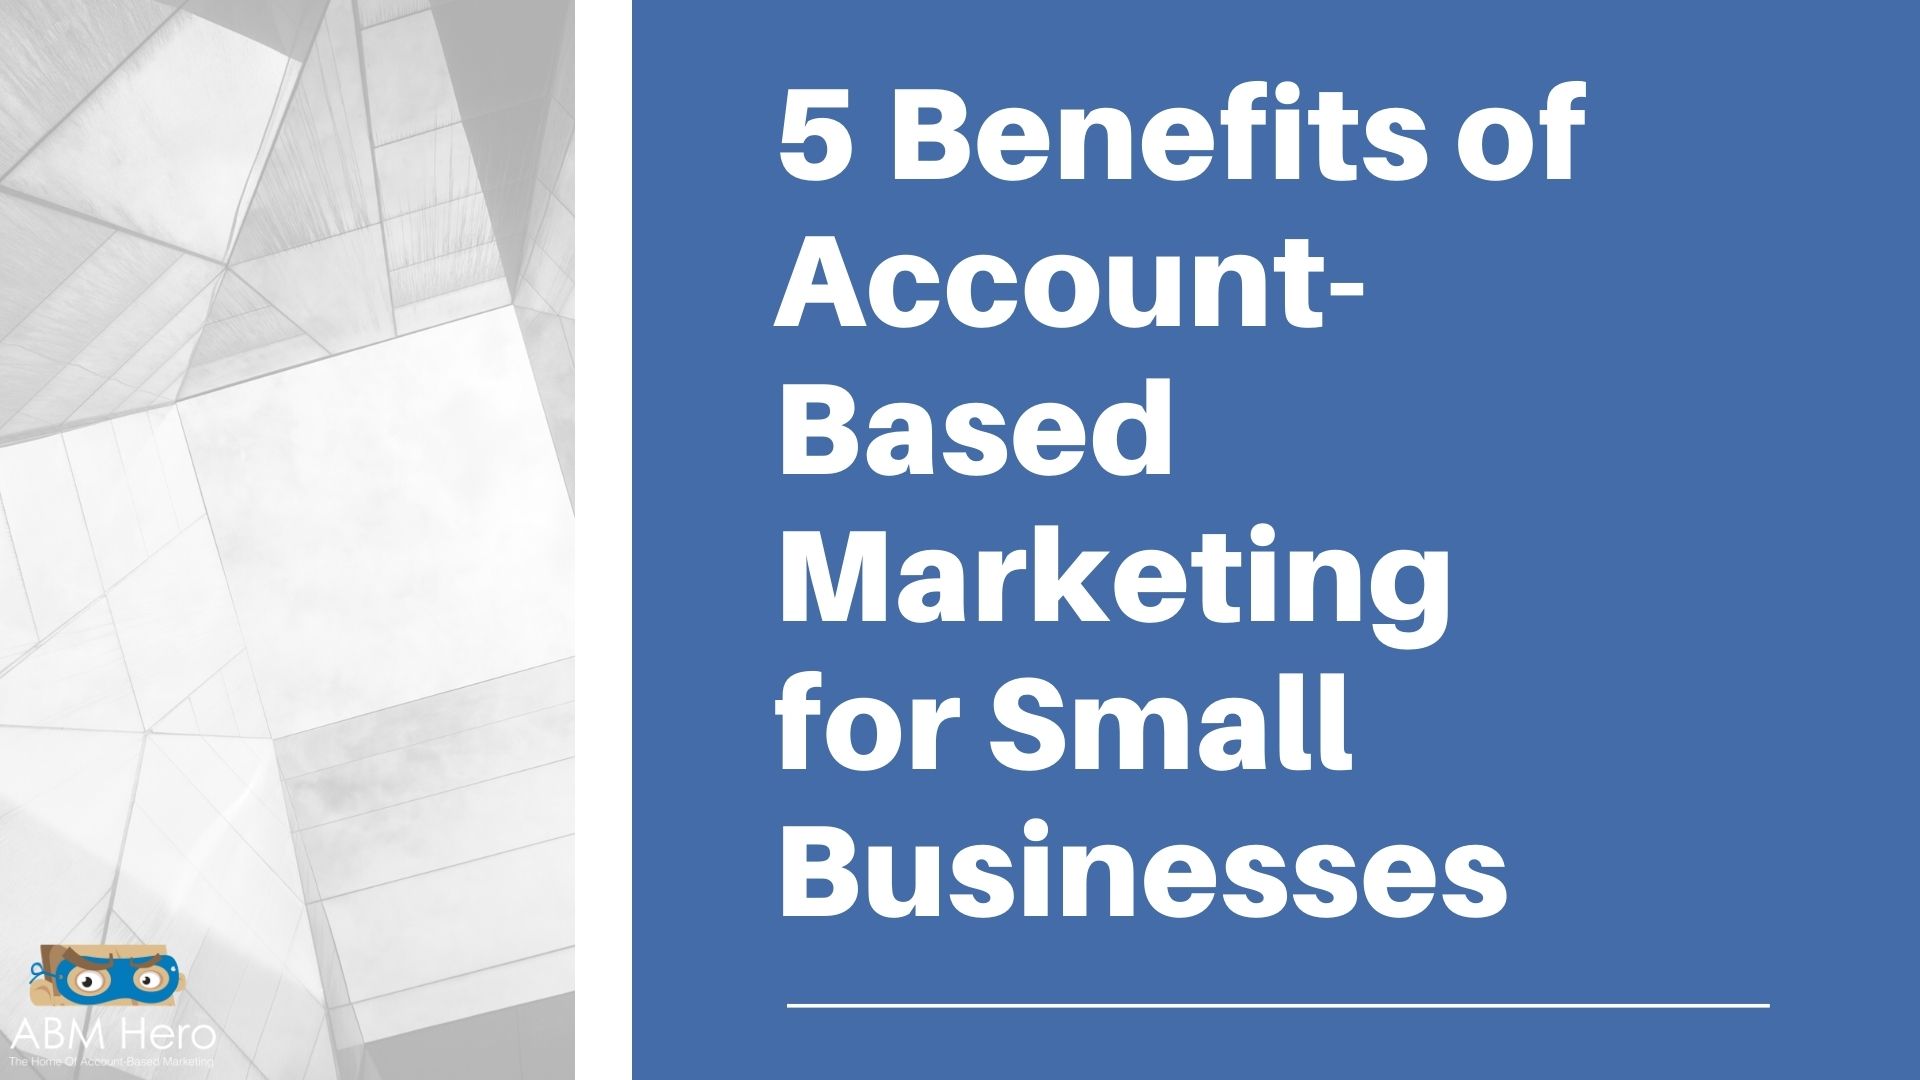 You are currently viewing 5 Benefits of Account-Based Marketing for Small Businesses